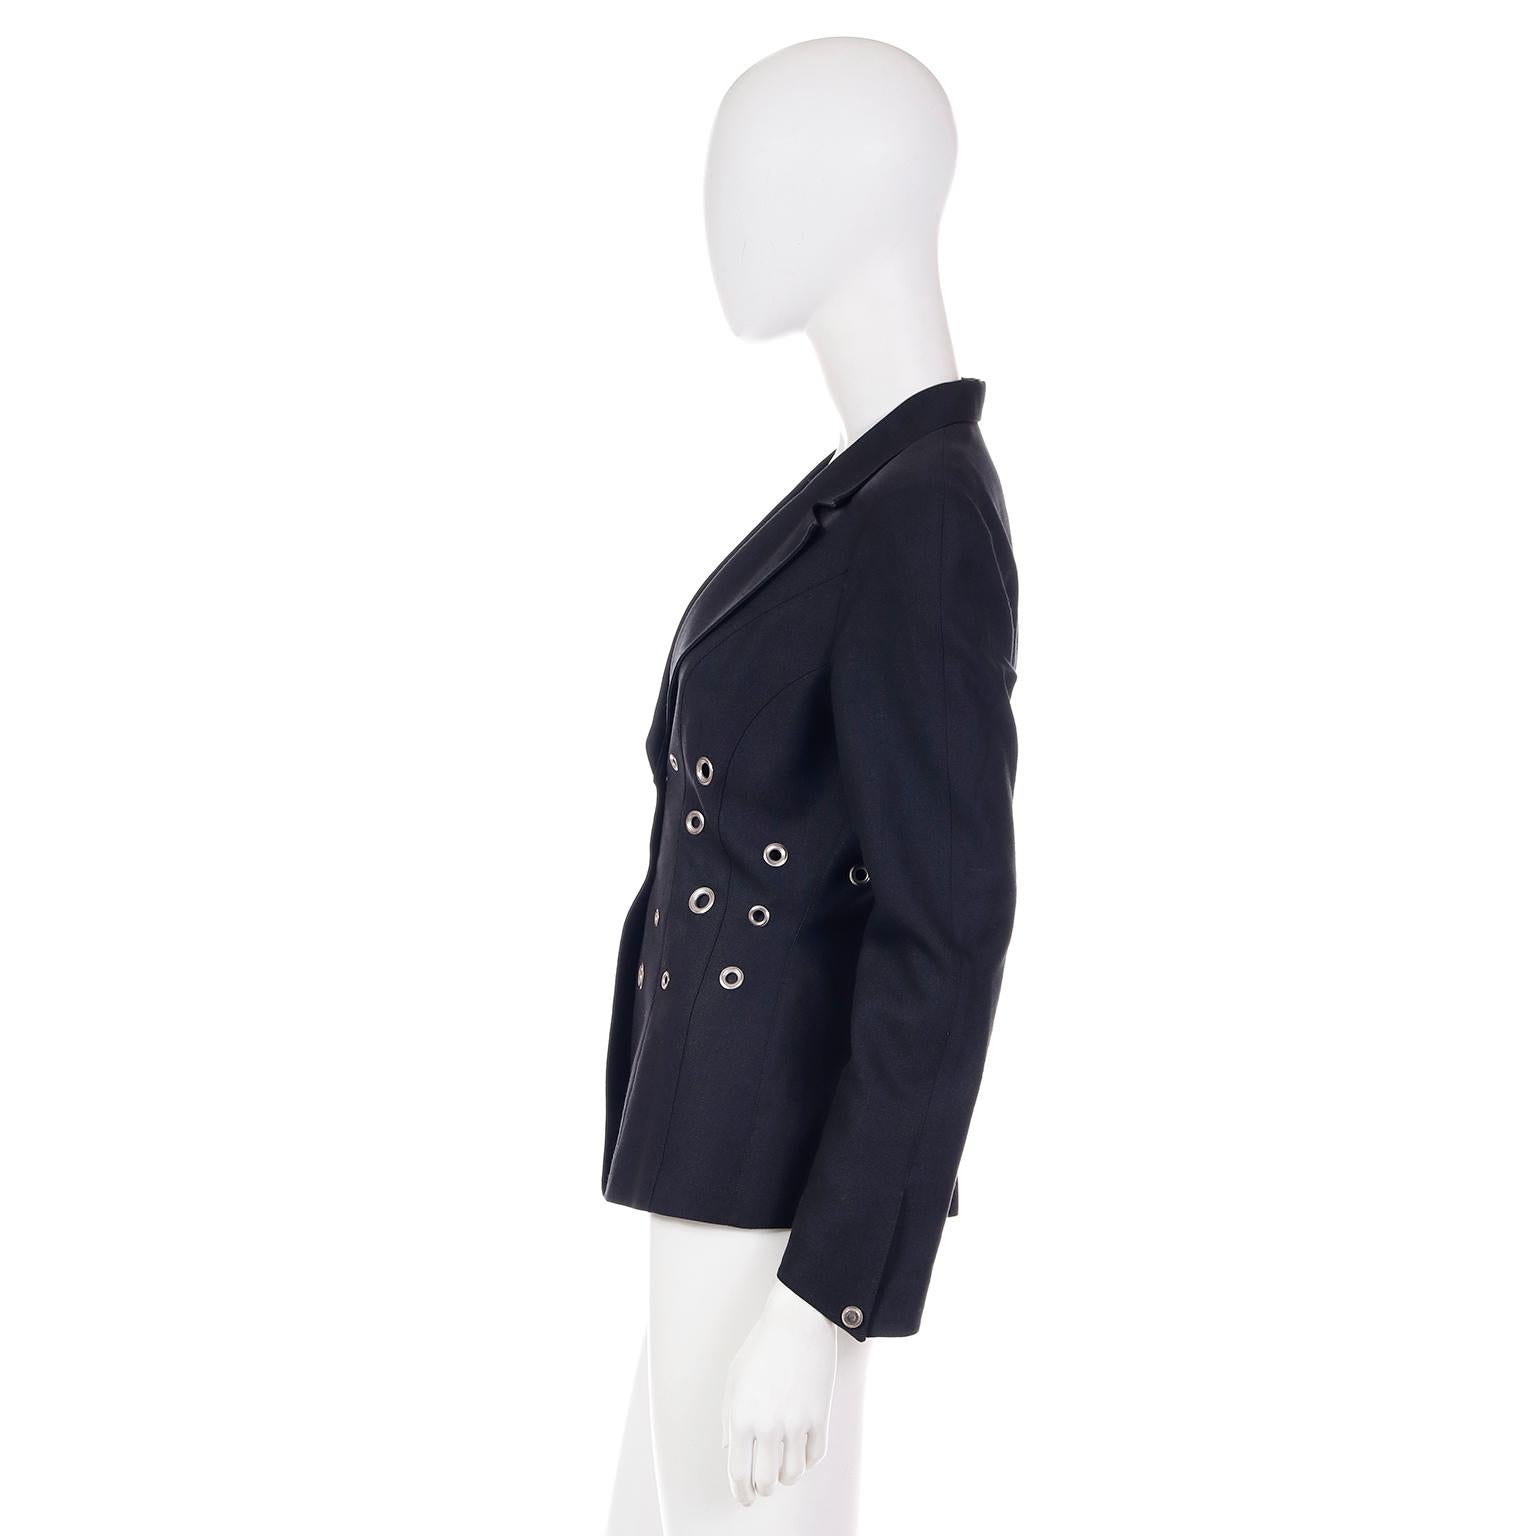 Thierry Mugler Paris Vintage Grey Black Jacket With Silver Grommets 5